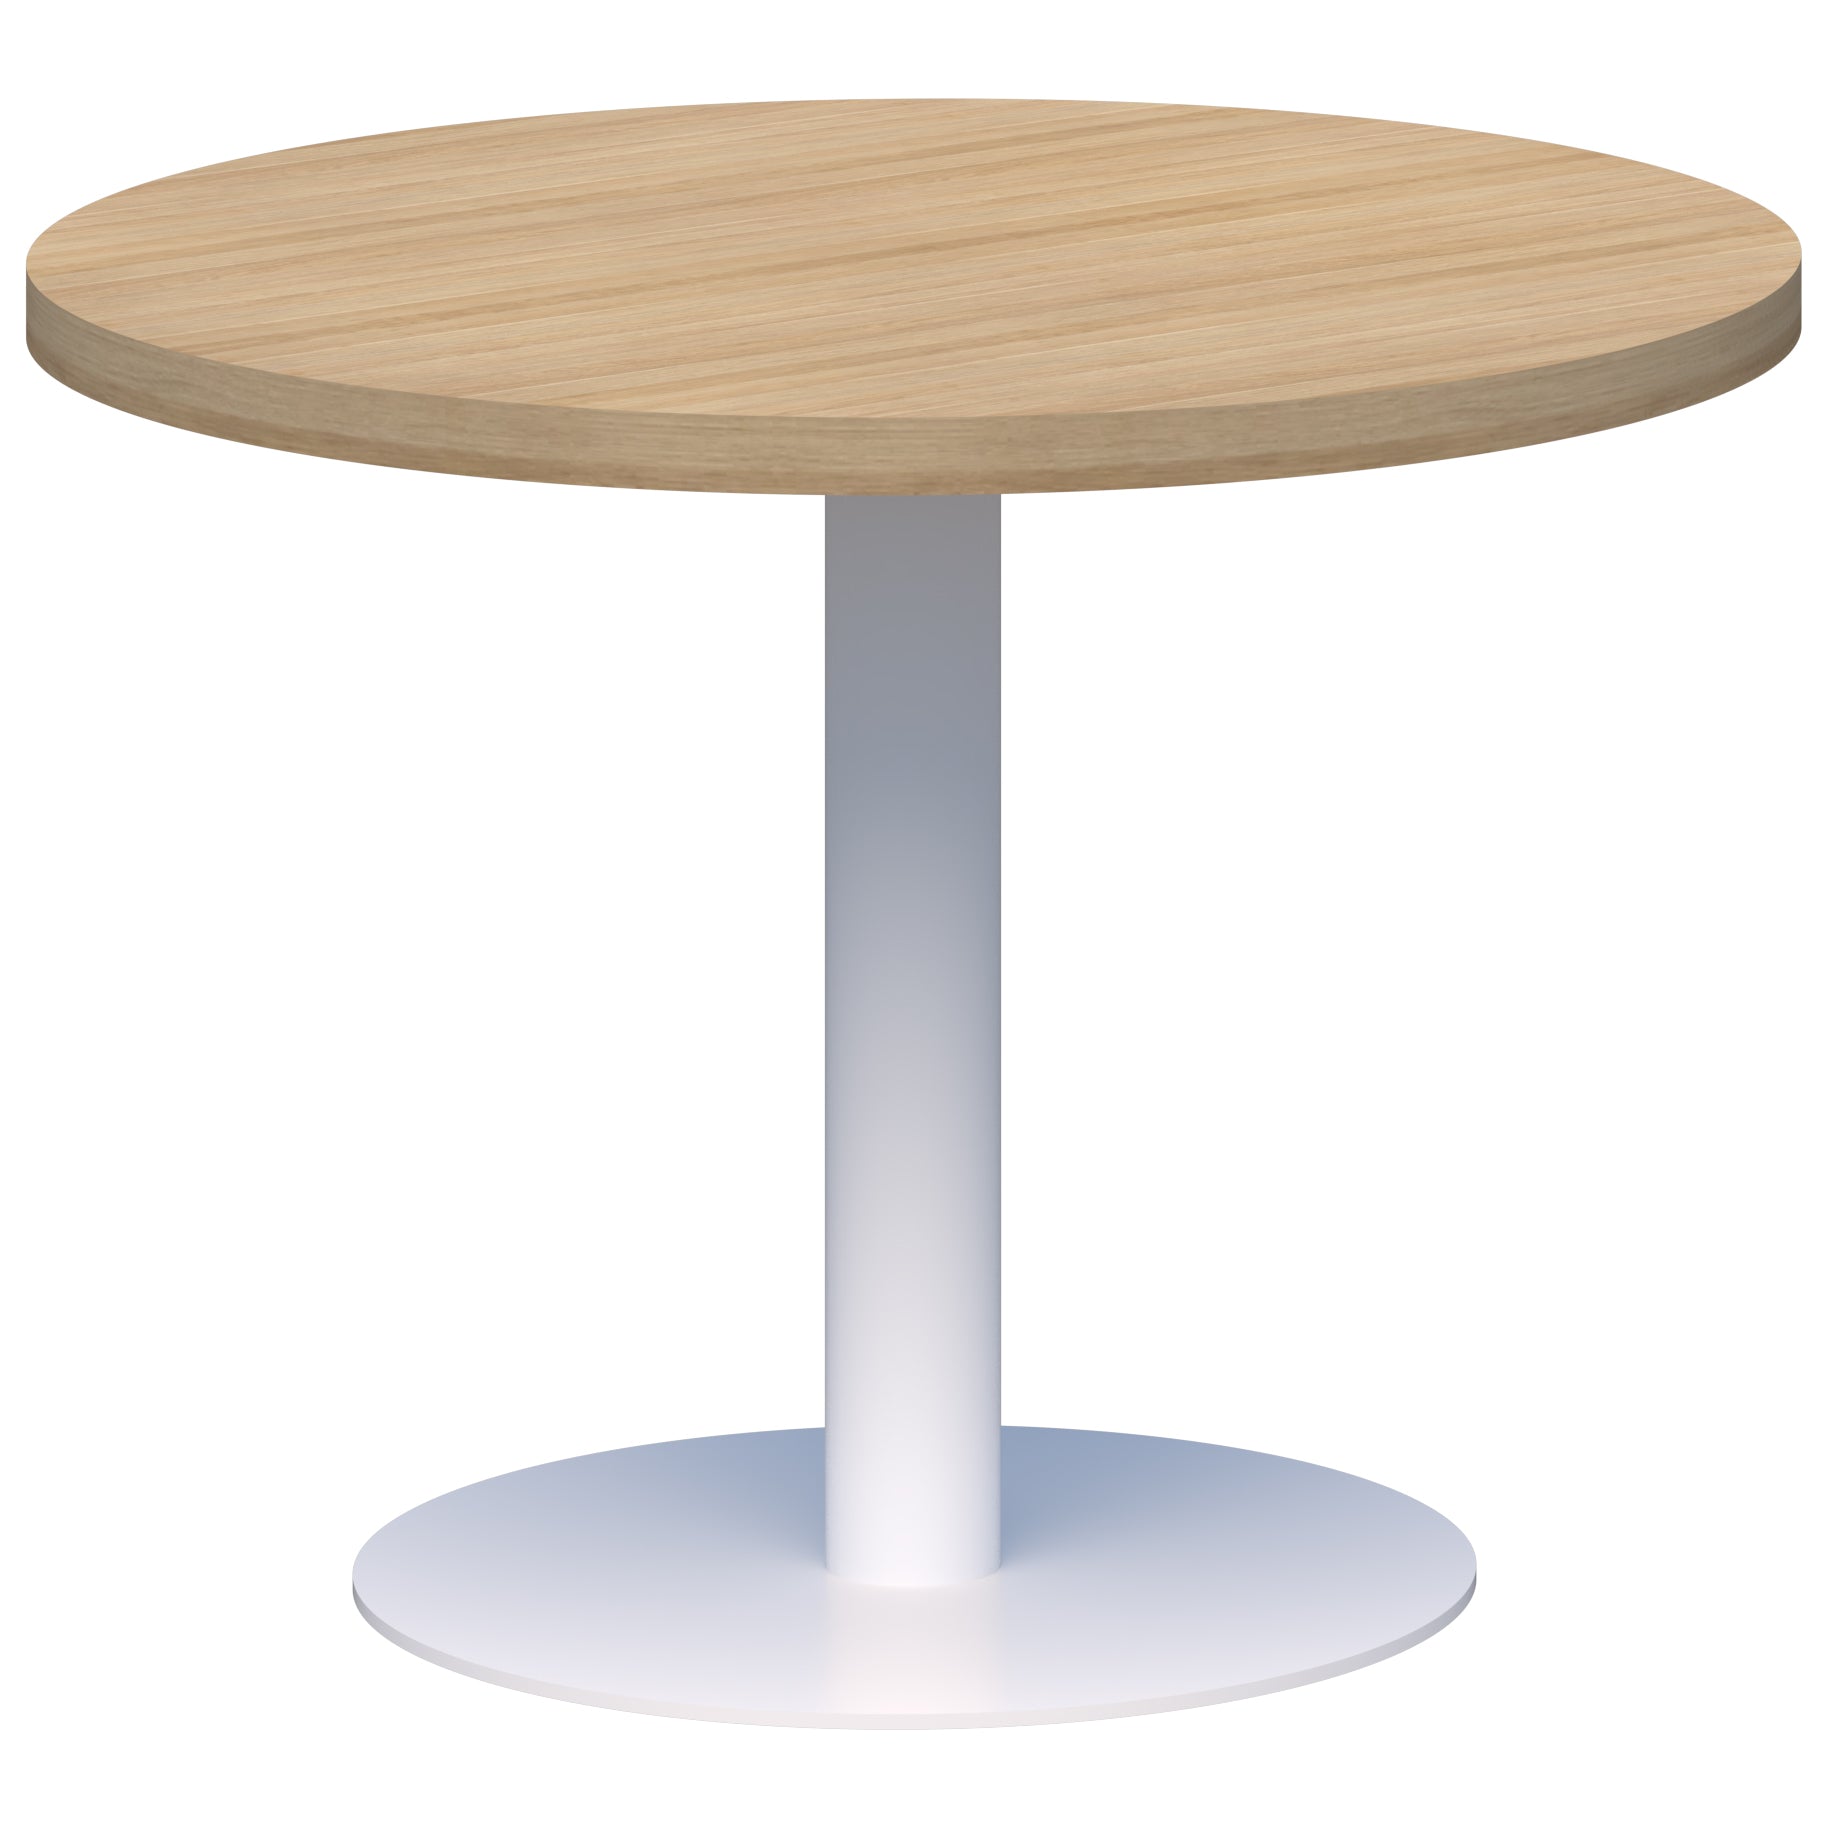 Classic Round Coffee Table 600-Coffee Table-Smart Office Furniture